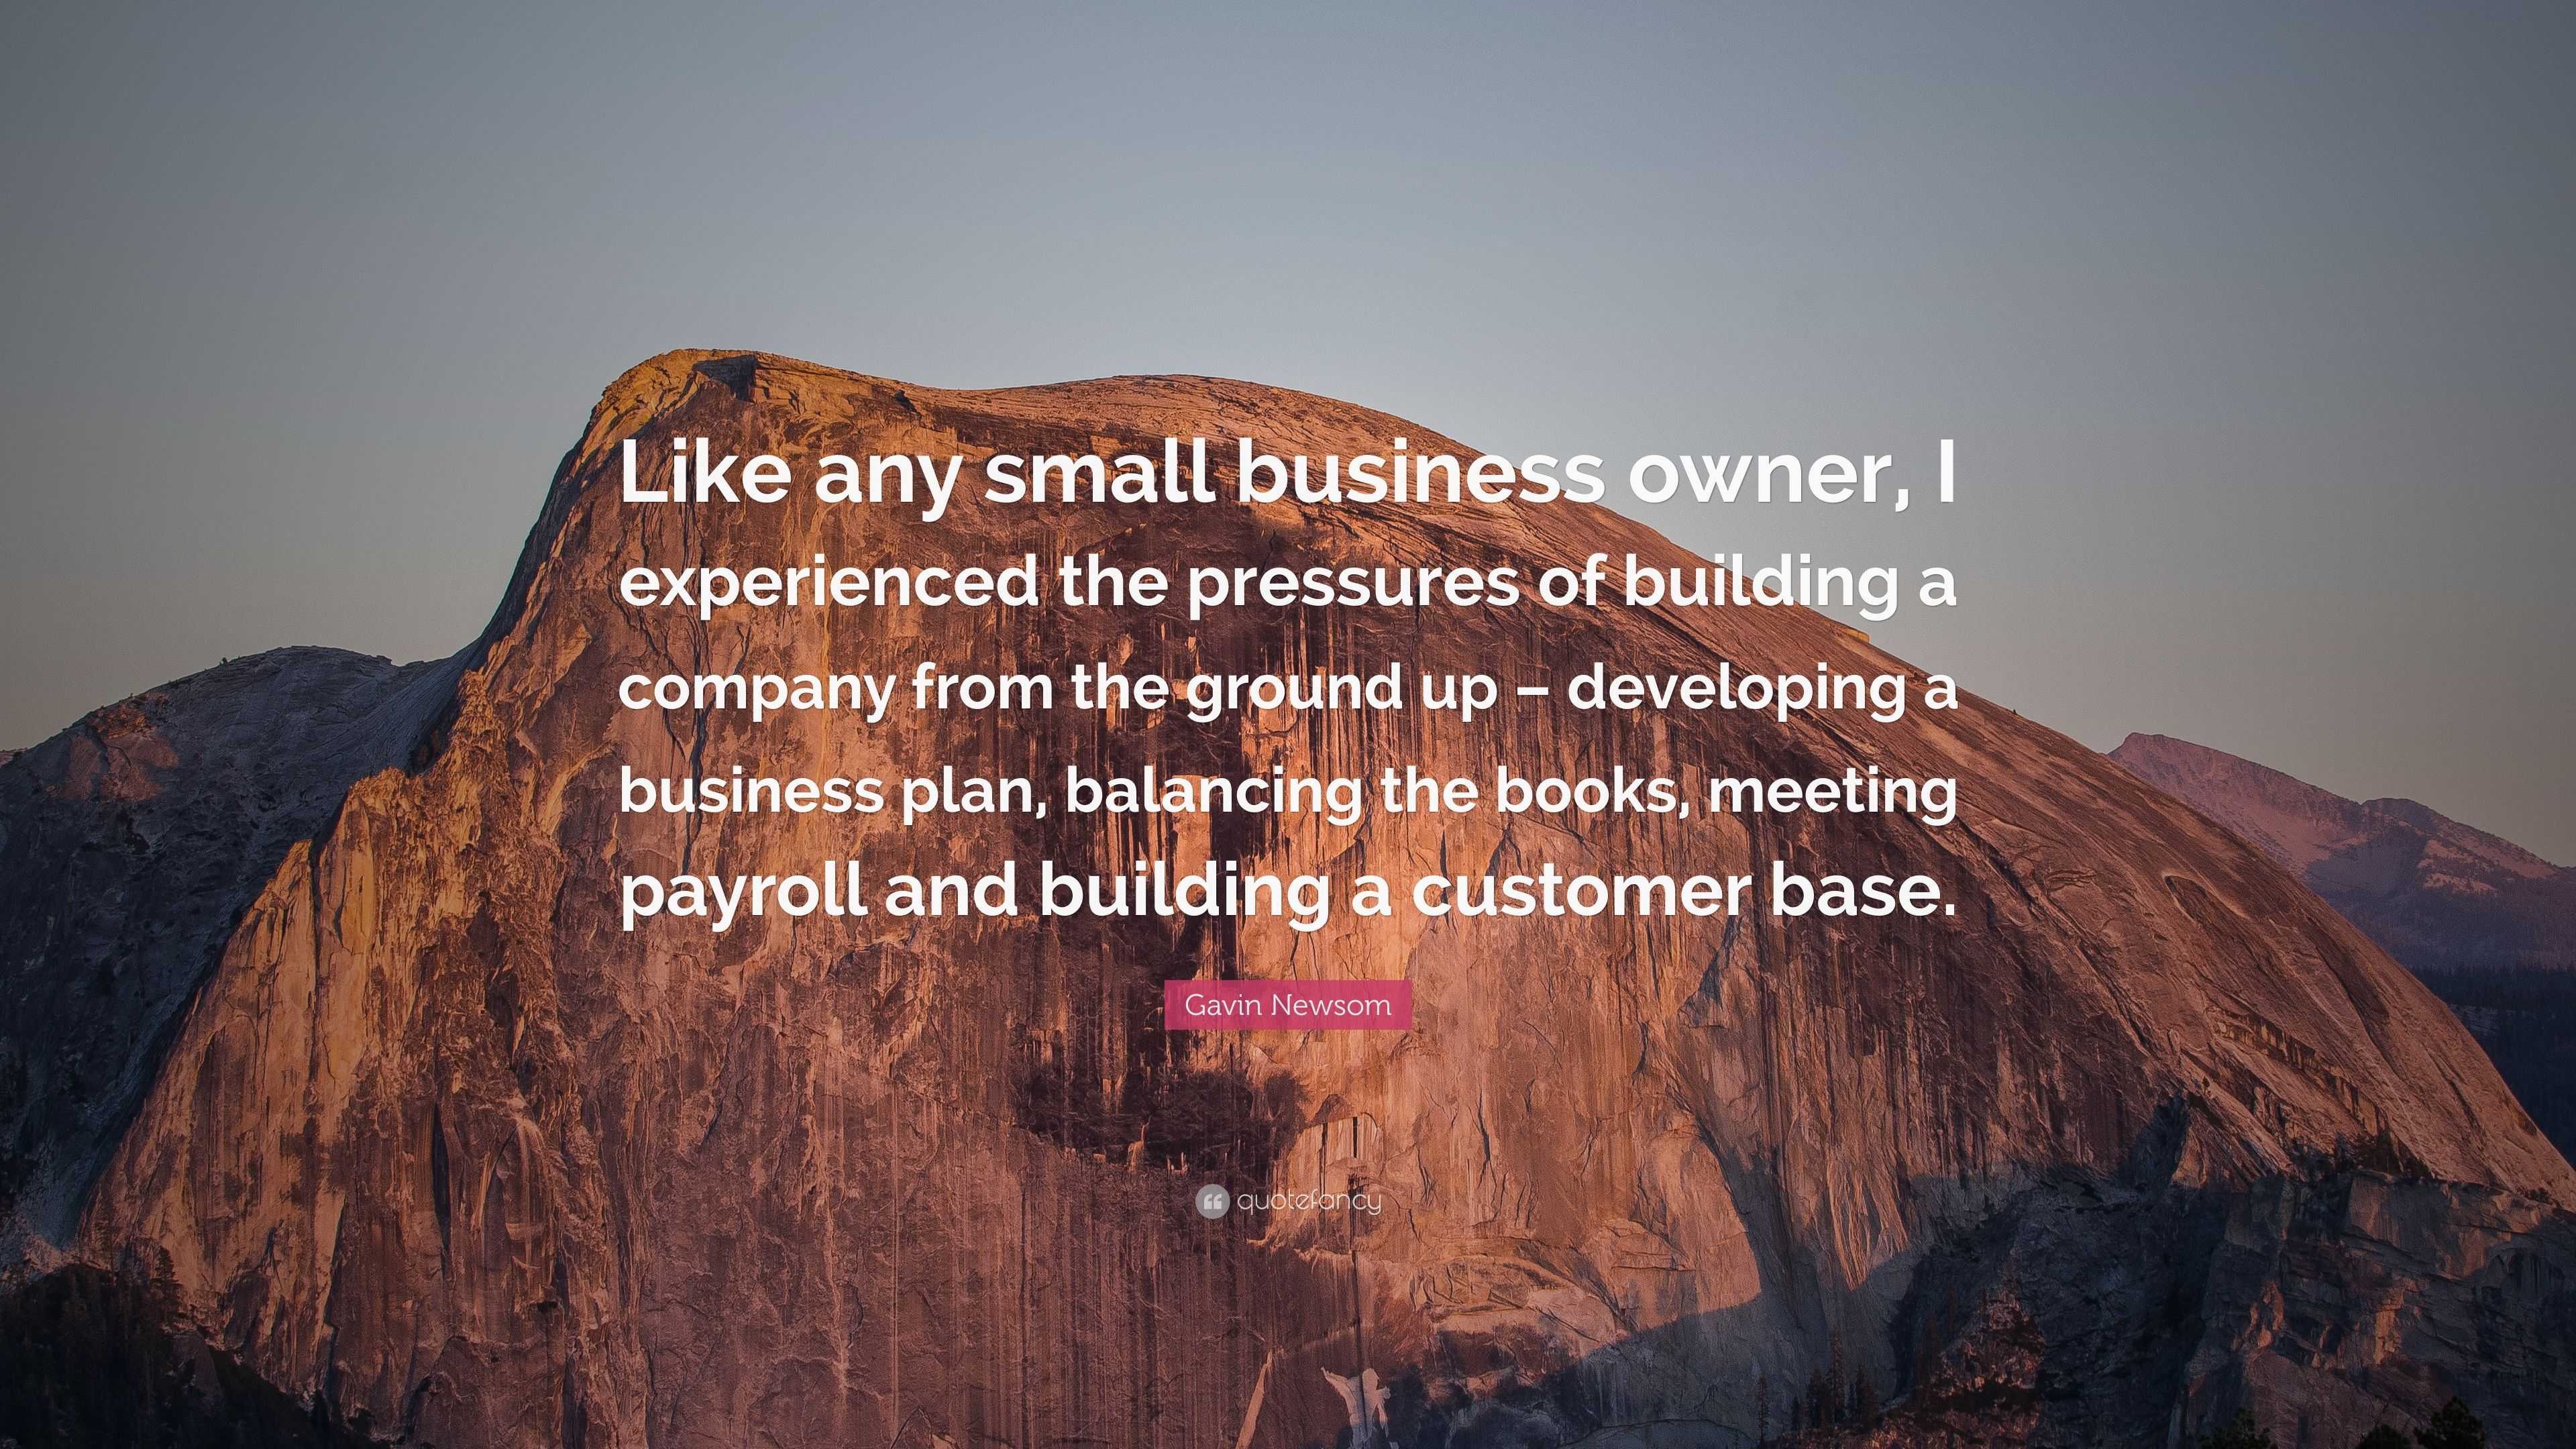 Gavin Newsom Quote: “Like any small business owner, I experienced the